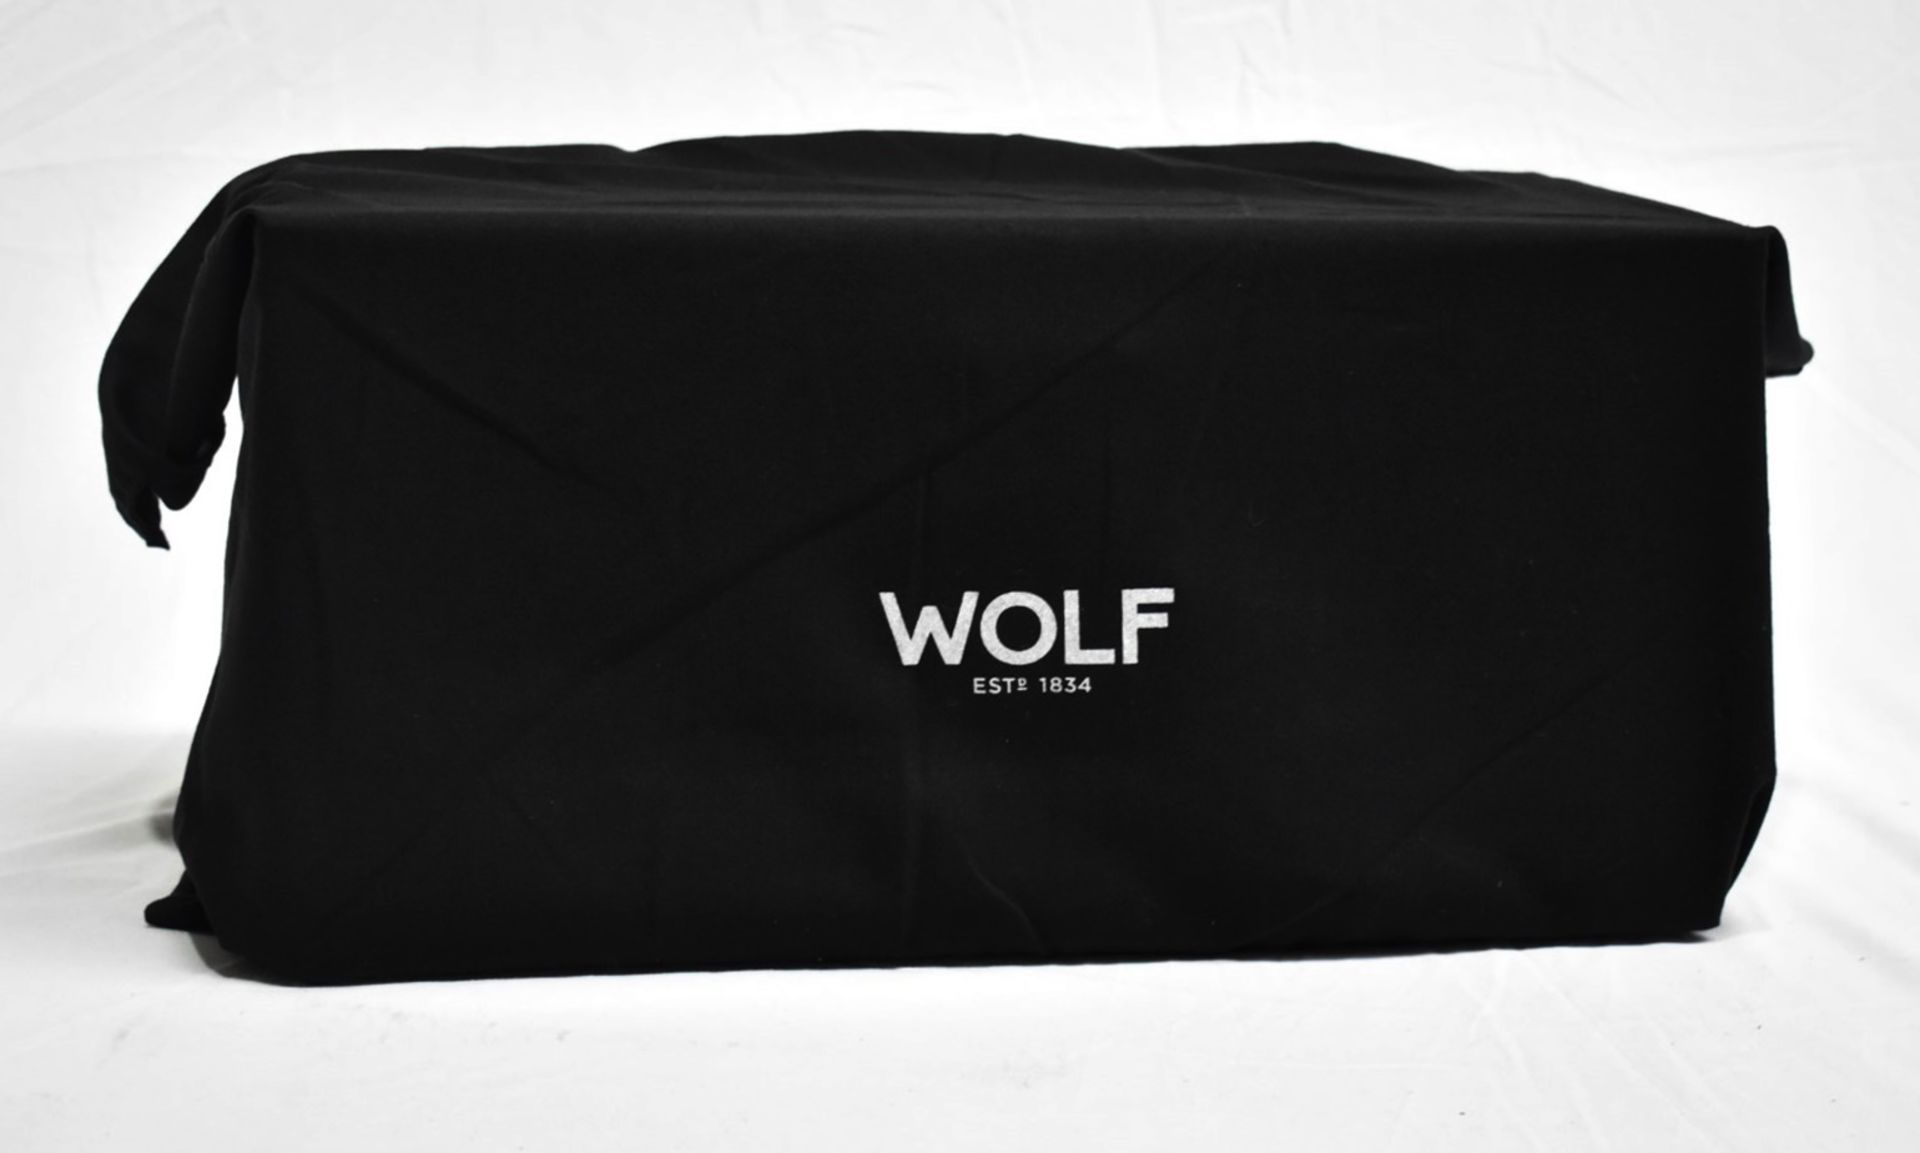 1 x WOLF 'Axis' Luxury Triple Watch Winder With Storage - Original Price £1,809 - Unused Boxed Stock - Image 23 of 32